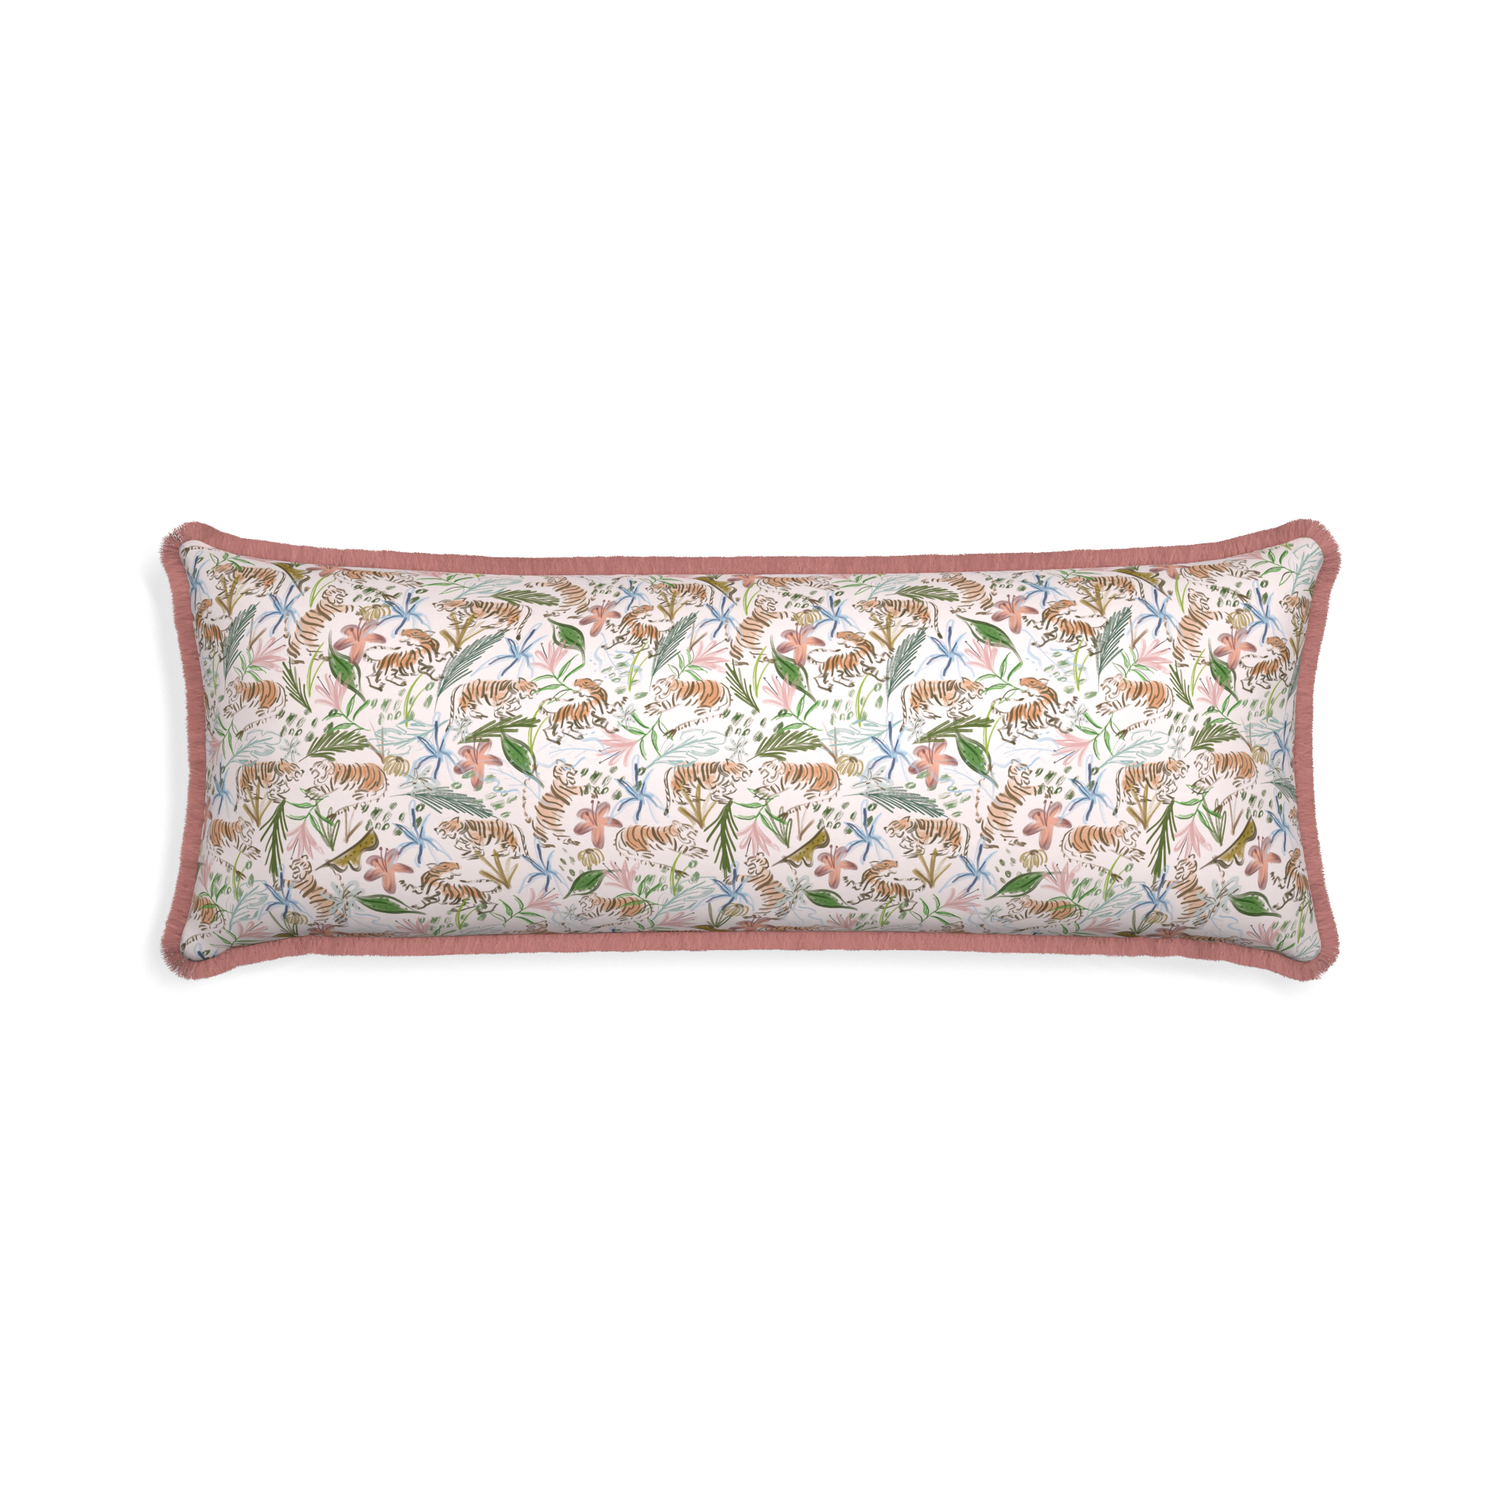 Xl-lumbar frida pink custom pink chinoiserie tigerpillow with d fringe on white background